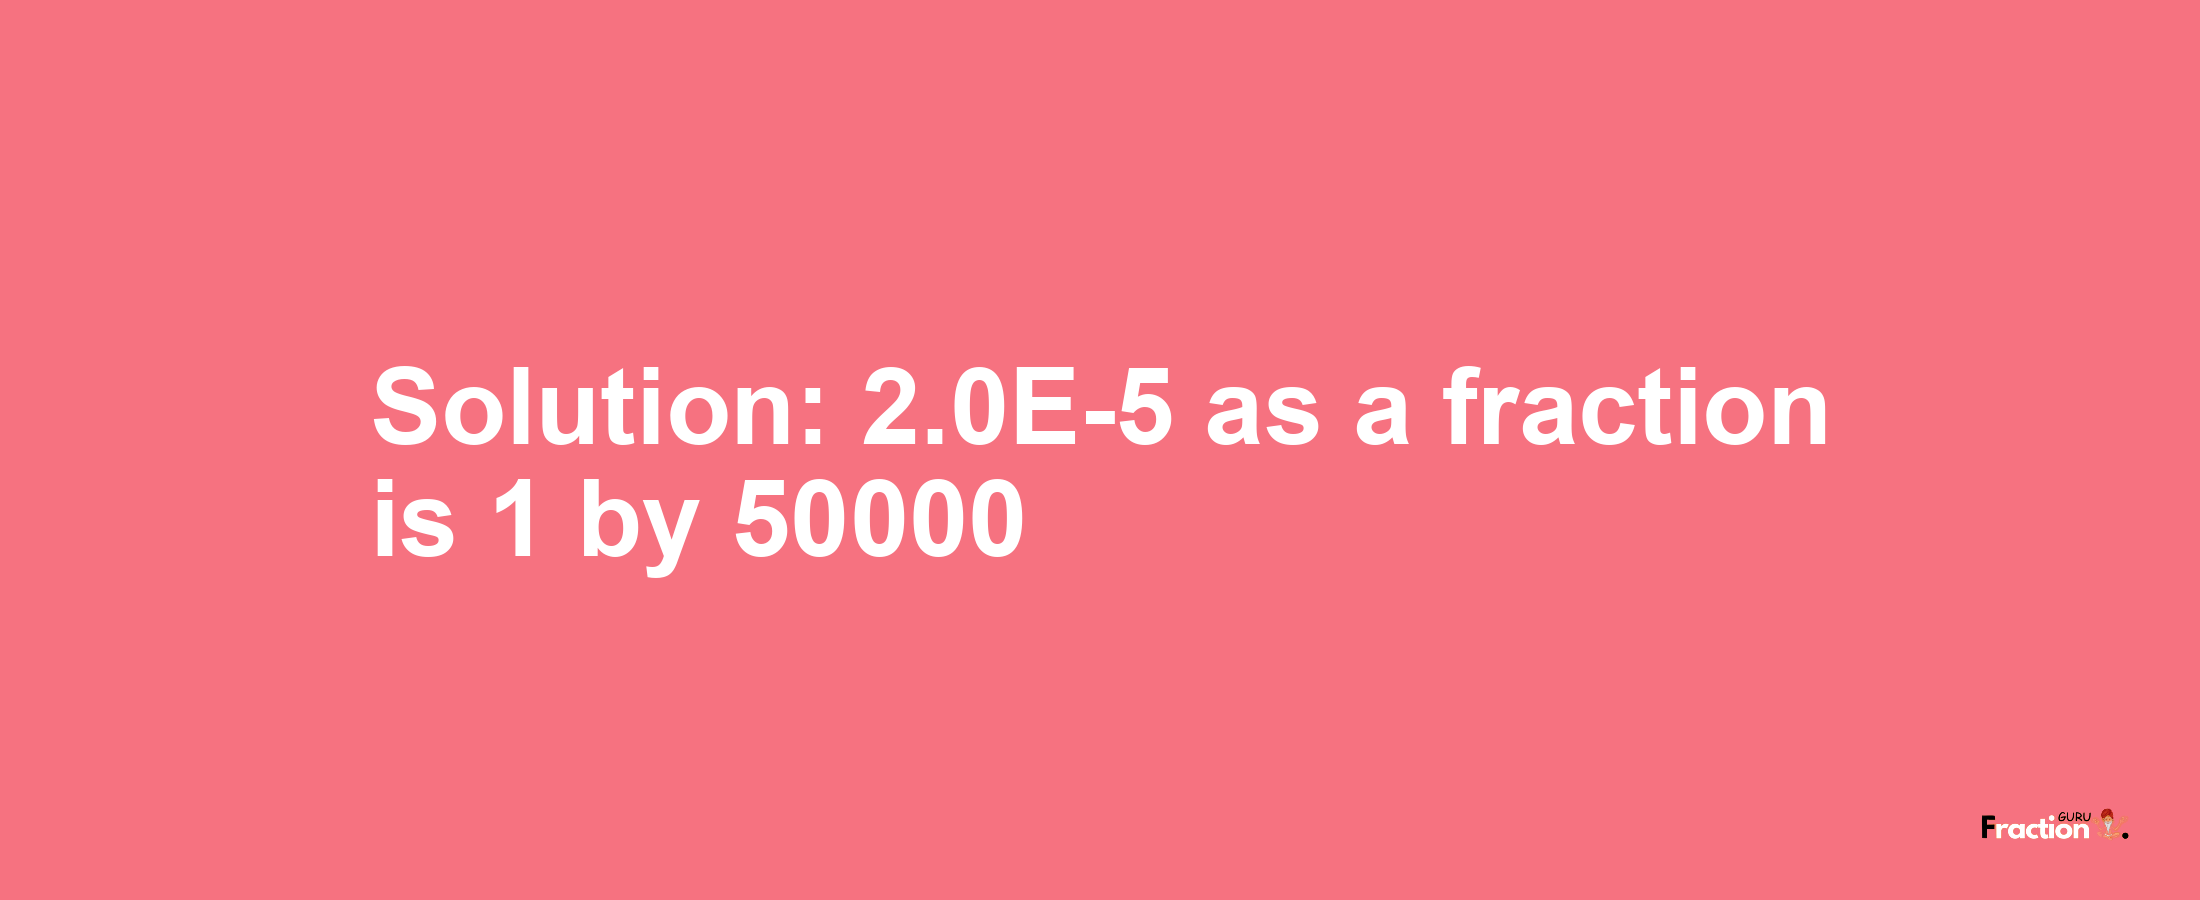 Solution:2.0E-5 as a fraction is 1/50000